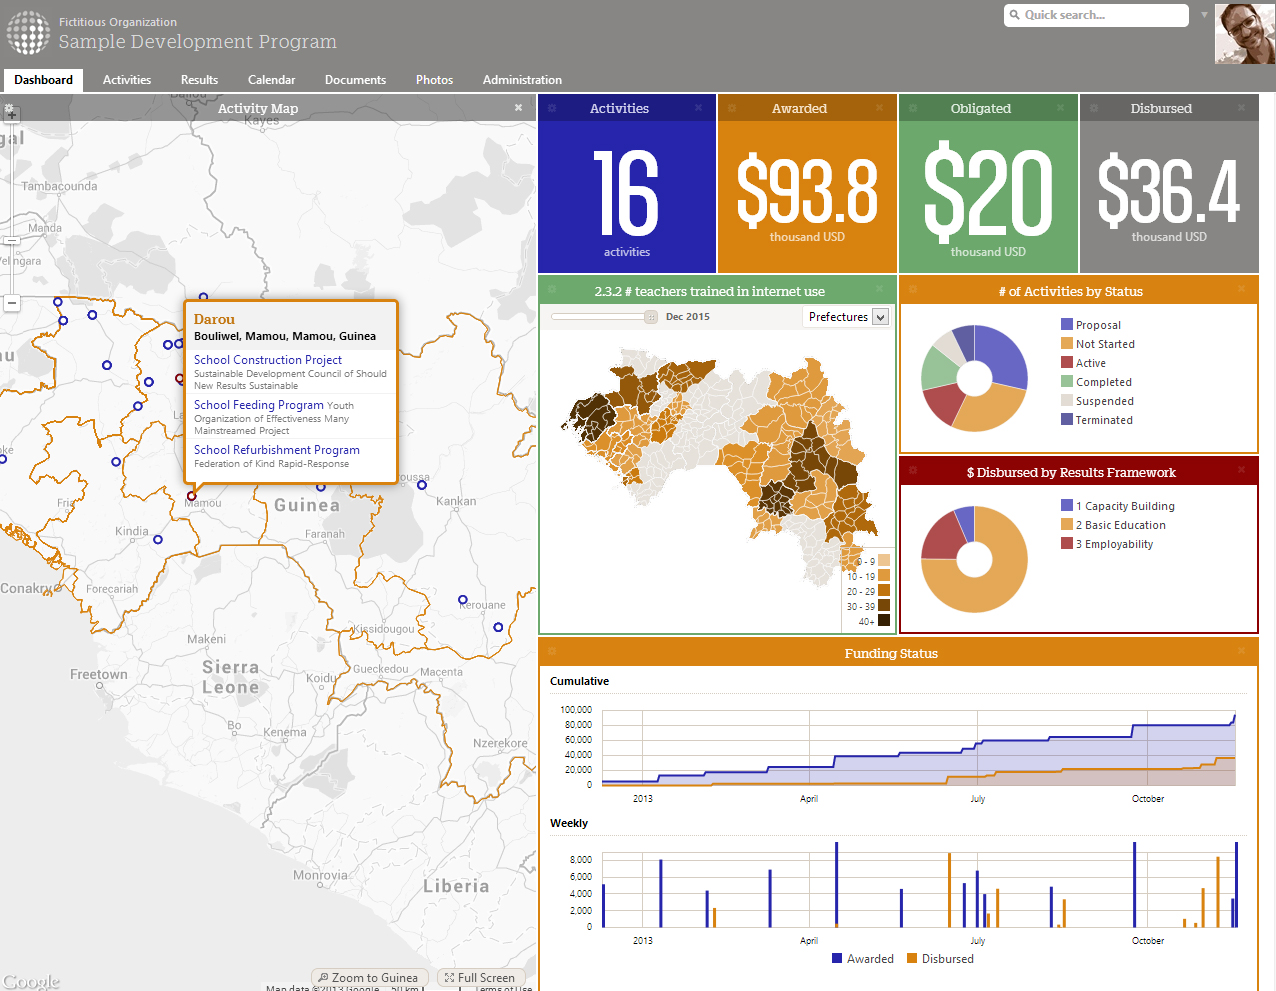 Colorful screenshot of a DevResults dashboard to reduce the visual weight of all this legal text